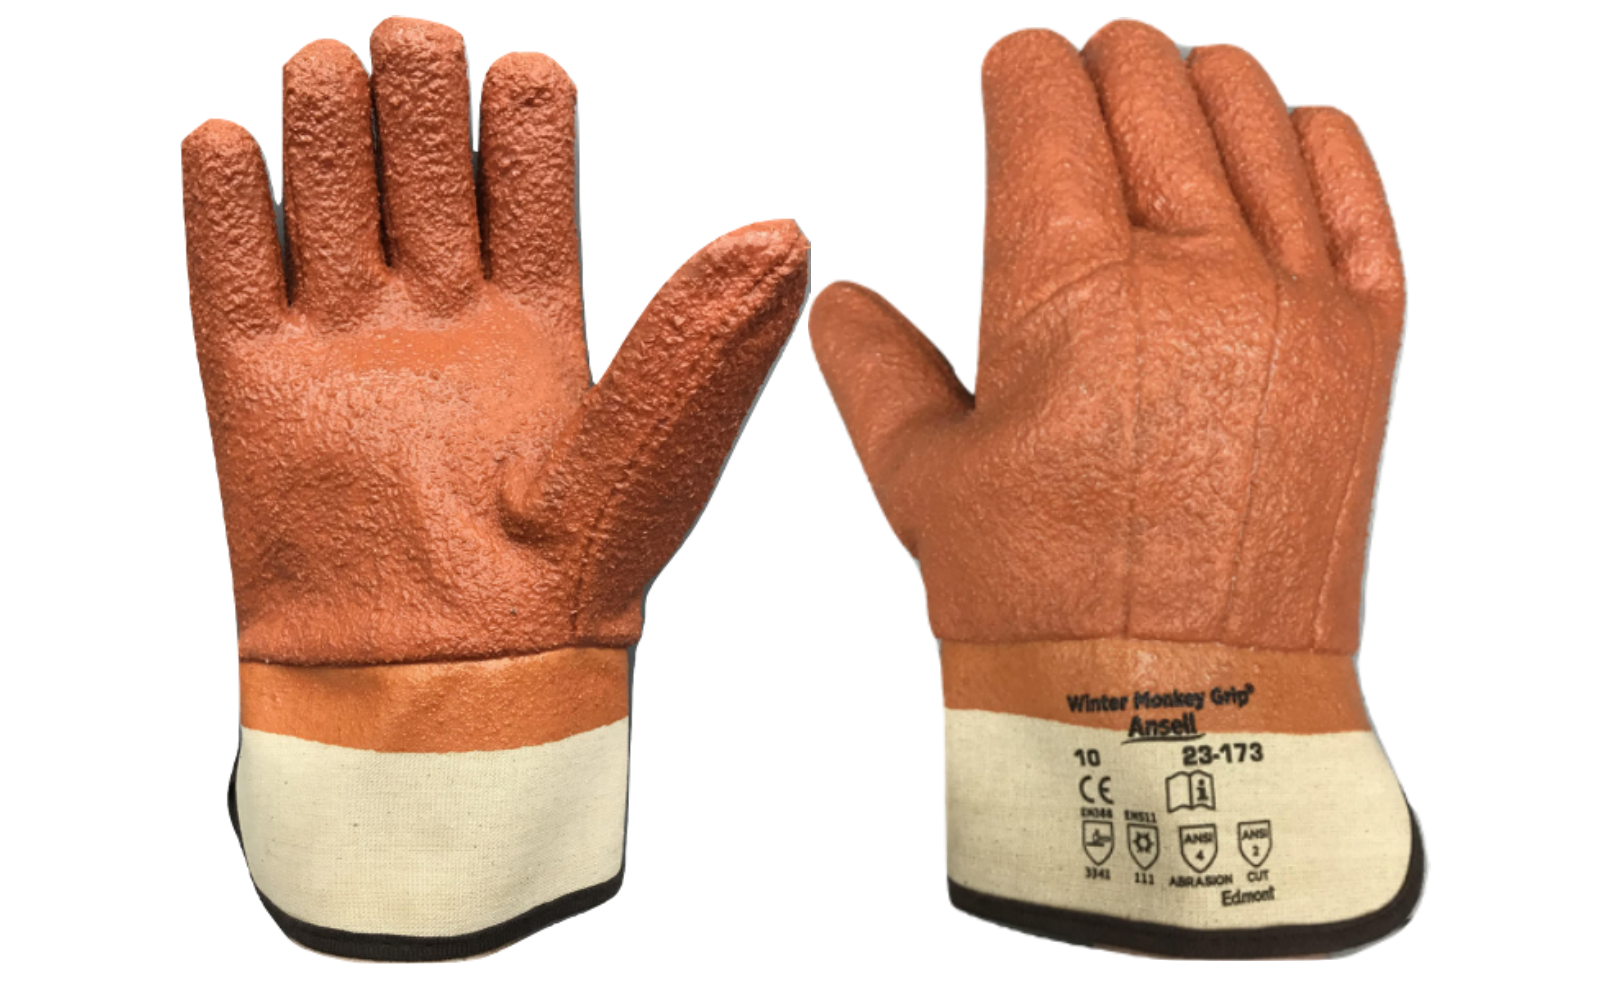 Ansell Grip Vinyl-Coated, Foam-Insulated Gloves